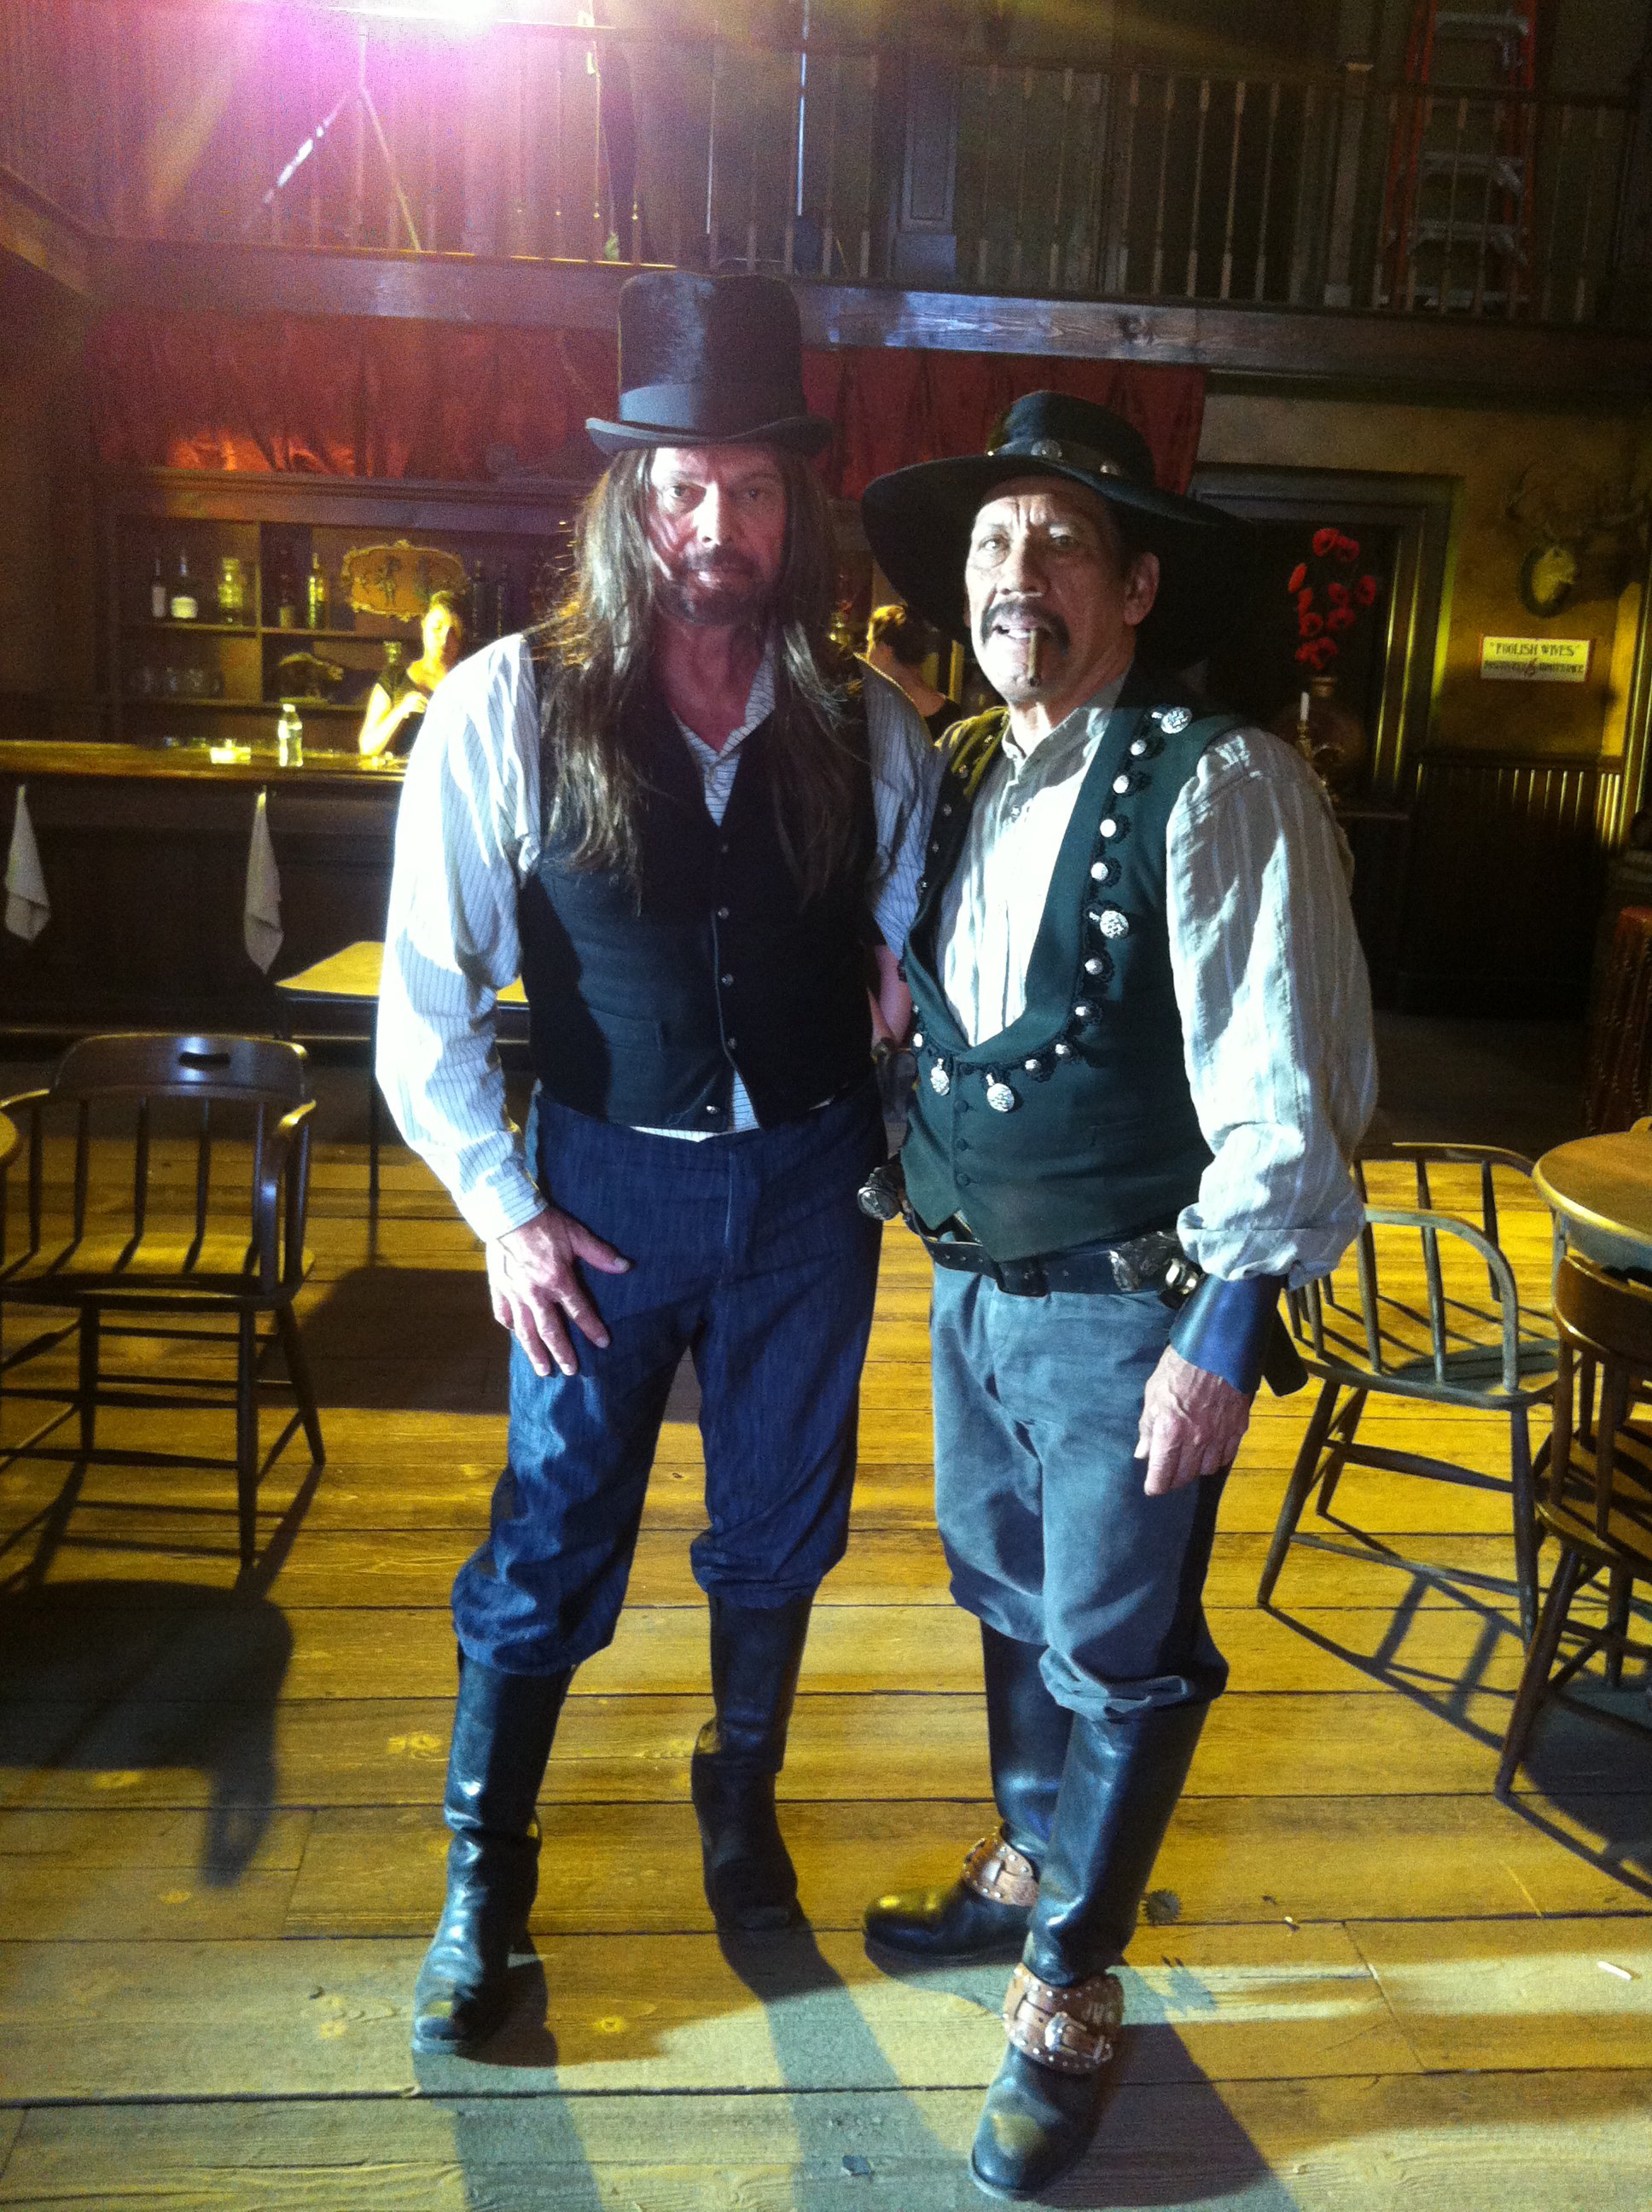 Working with Danny Trejo on The Last of The Duanes